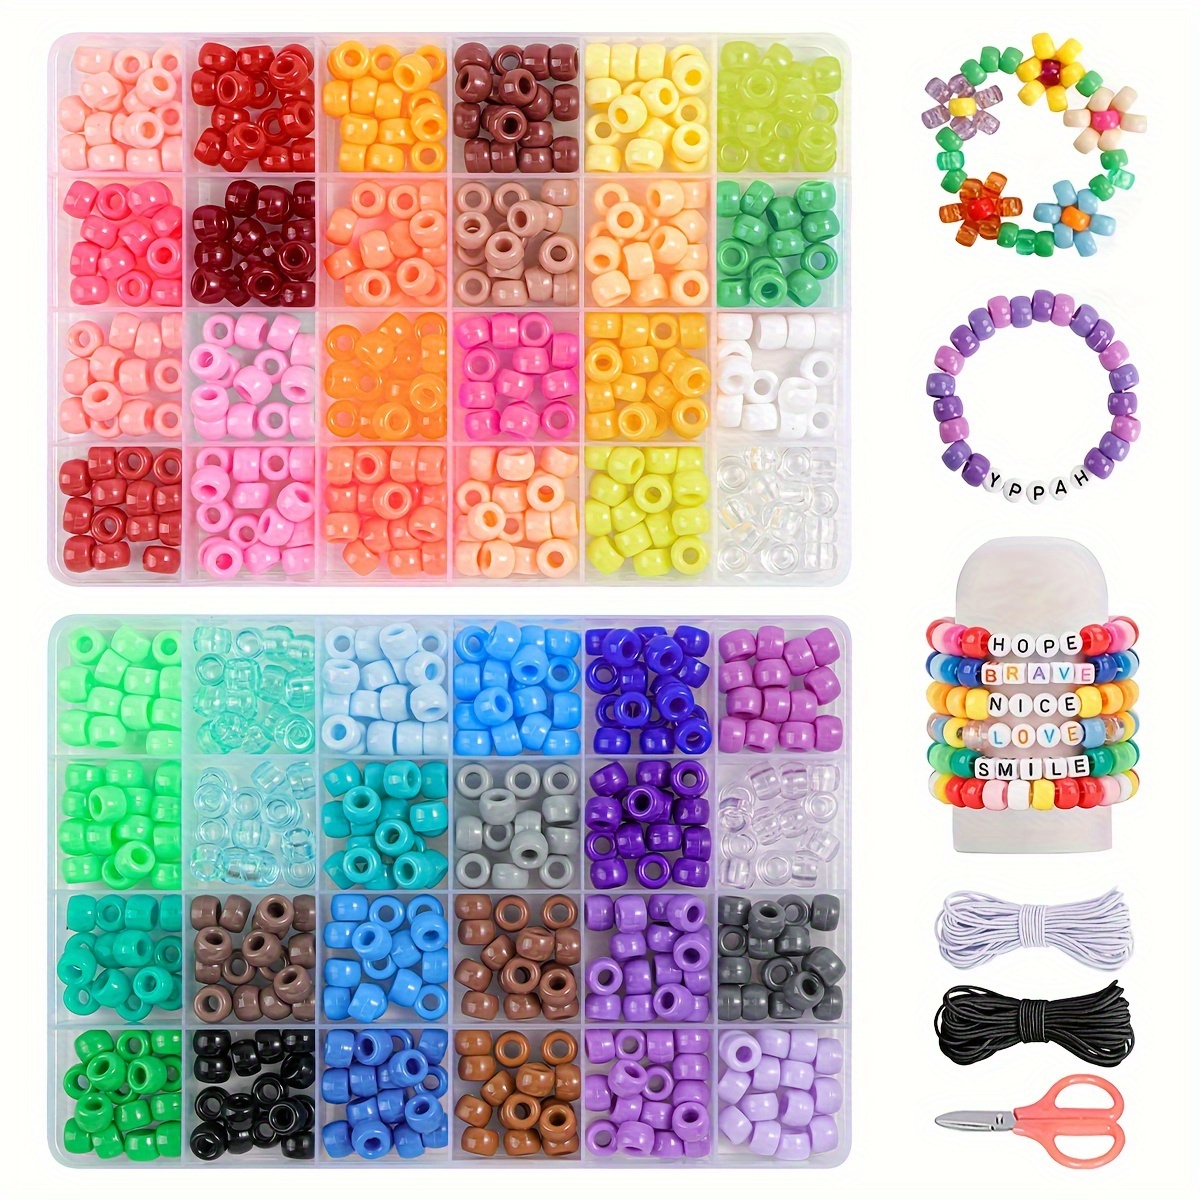  Pony Beads Bracelet Making Kit, Rainbow Kandi Beads for Jewelry  Making DIY, Hair Beads for Braids for Girls Women with Hair Beaders Rubber  Bands Elastic String, Ideal School Gift